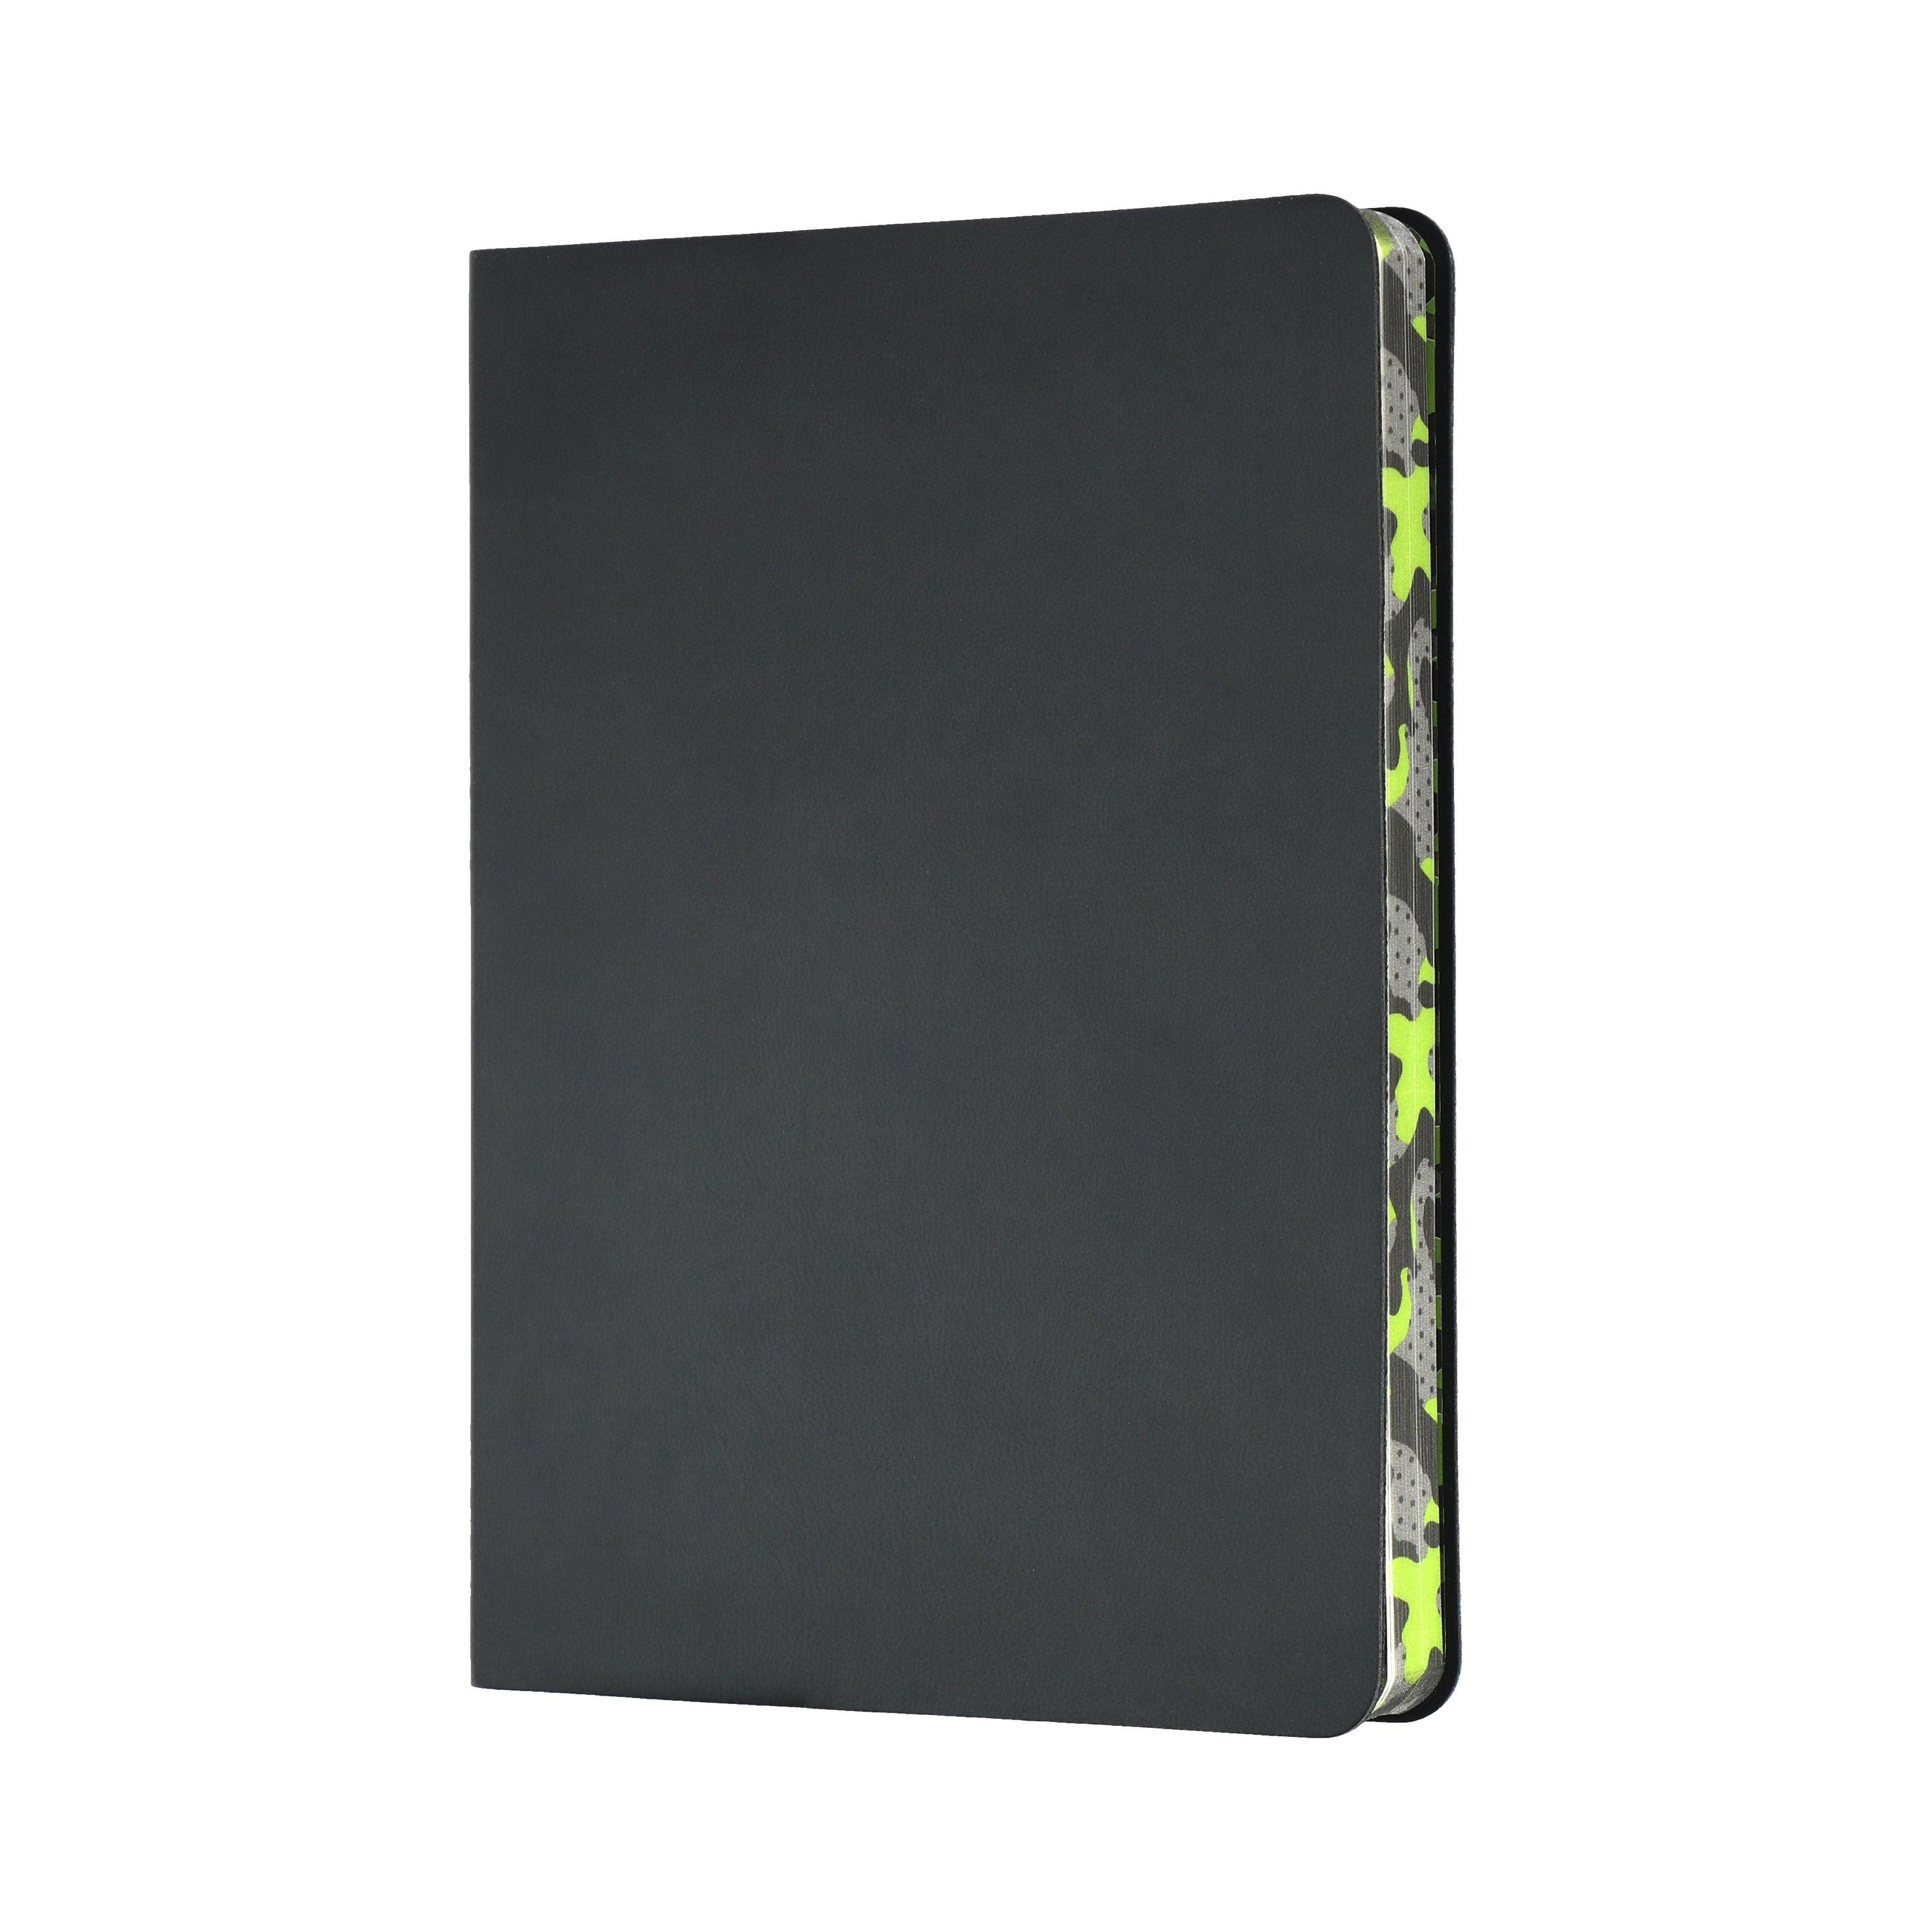 Collins Edge Camo Ruled Notebook, Size B6